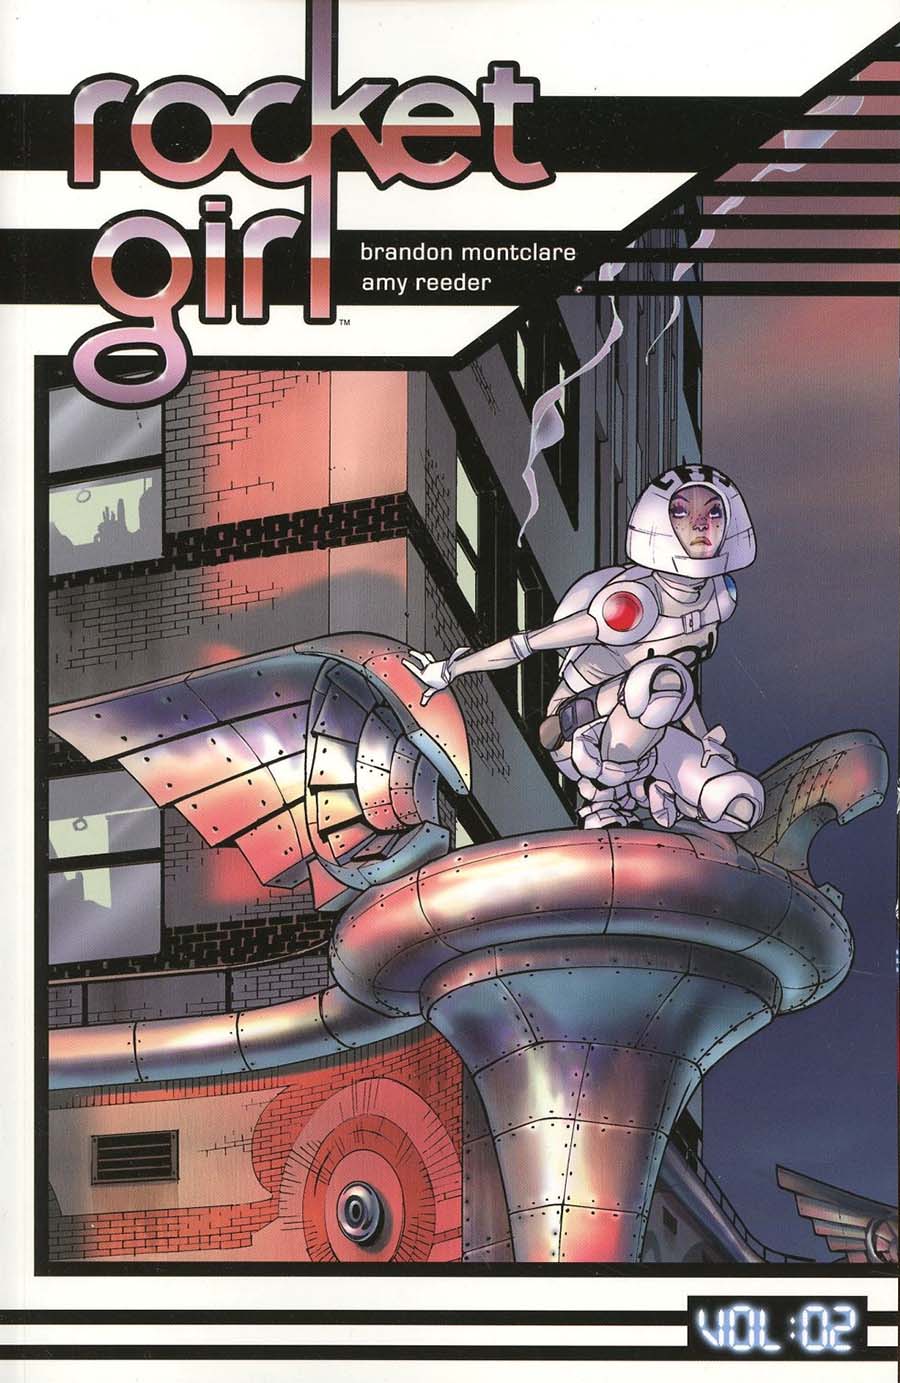 Rocket Girl Vol 2 Only The Good TP